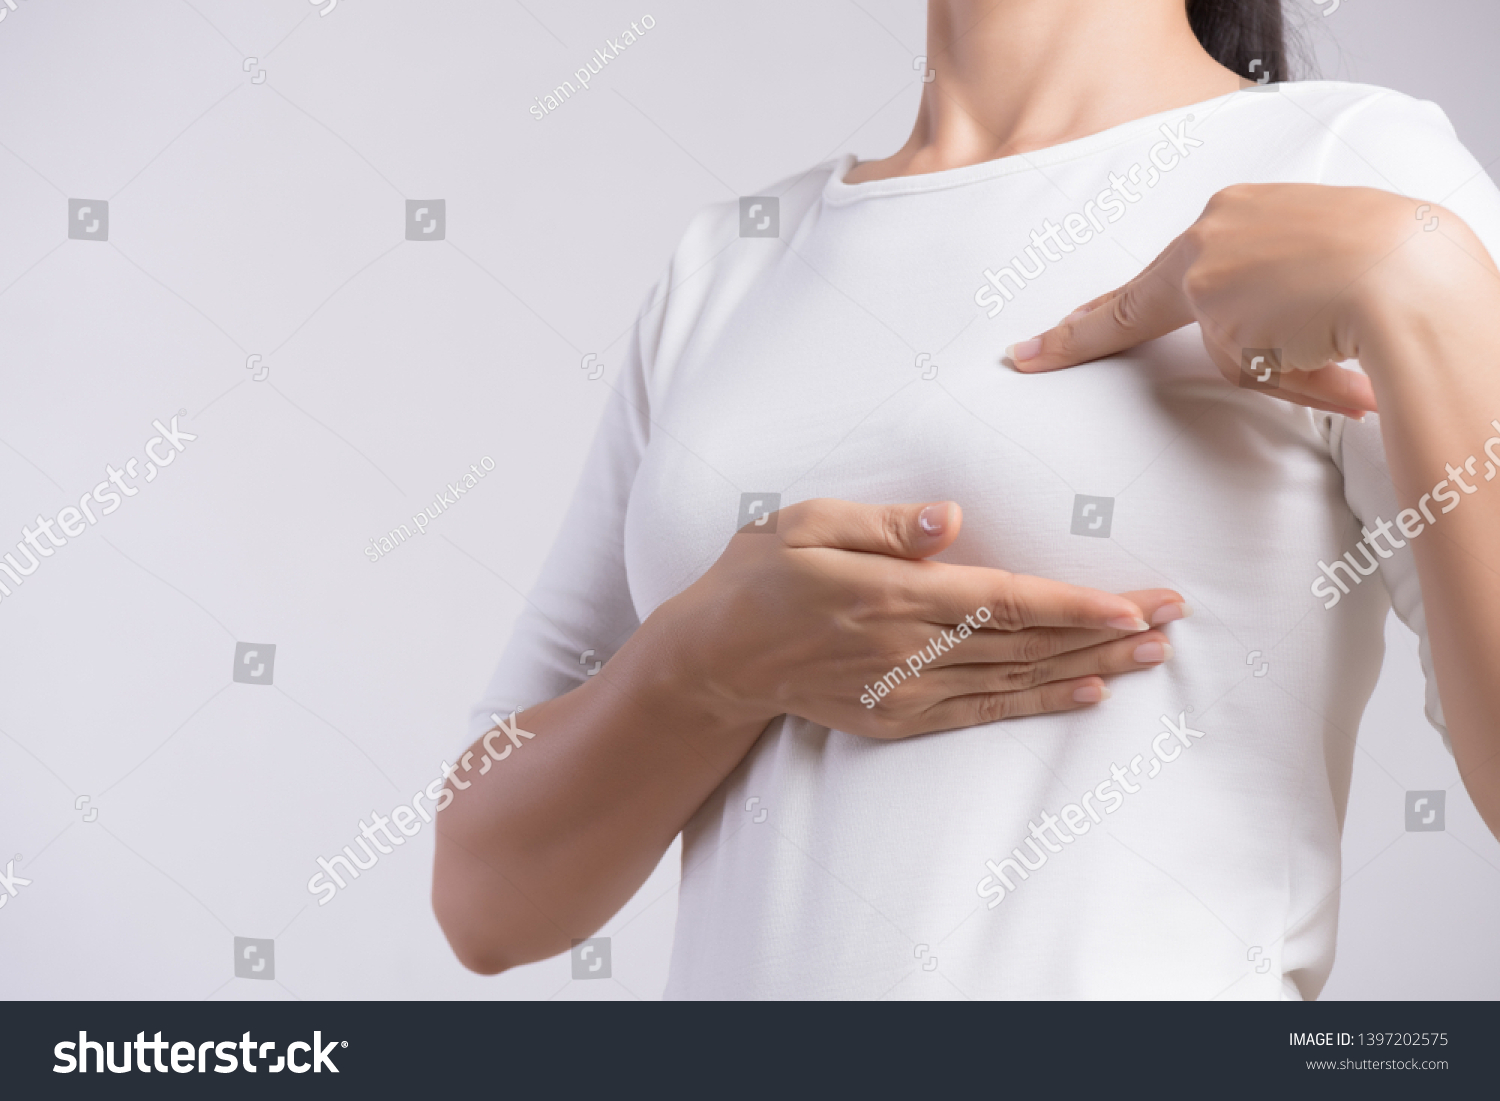 Woman hand checking lumps on her breast for signs of breast cancer on gray background. Healthcare concept. #1397202575